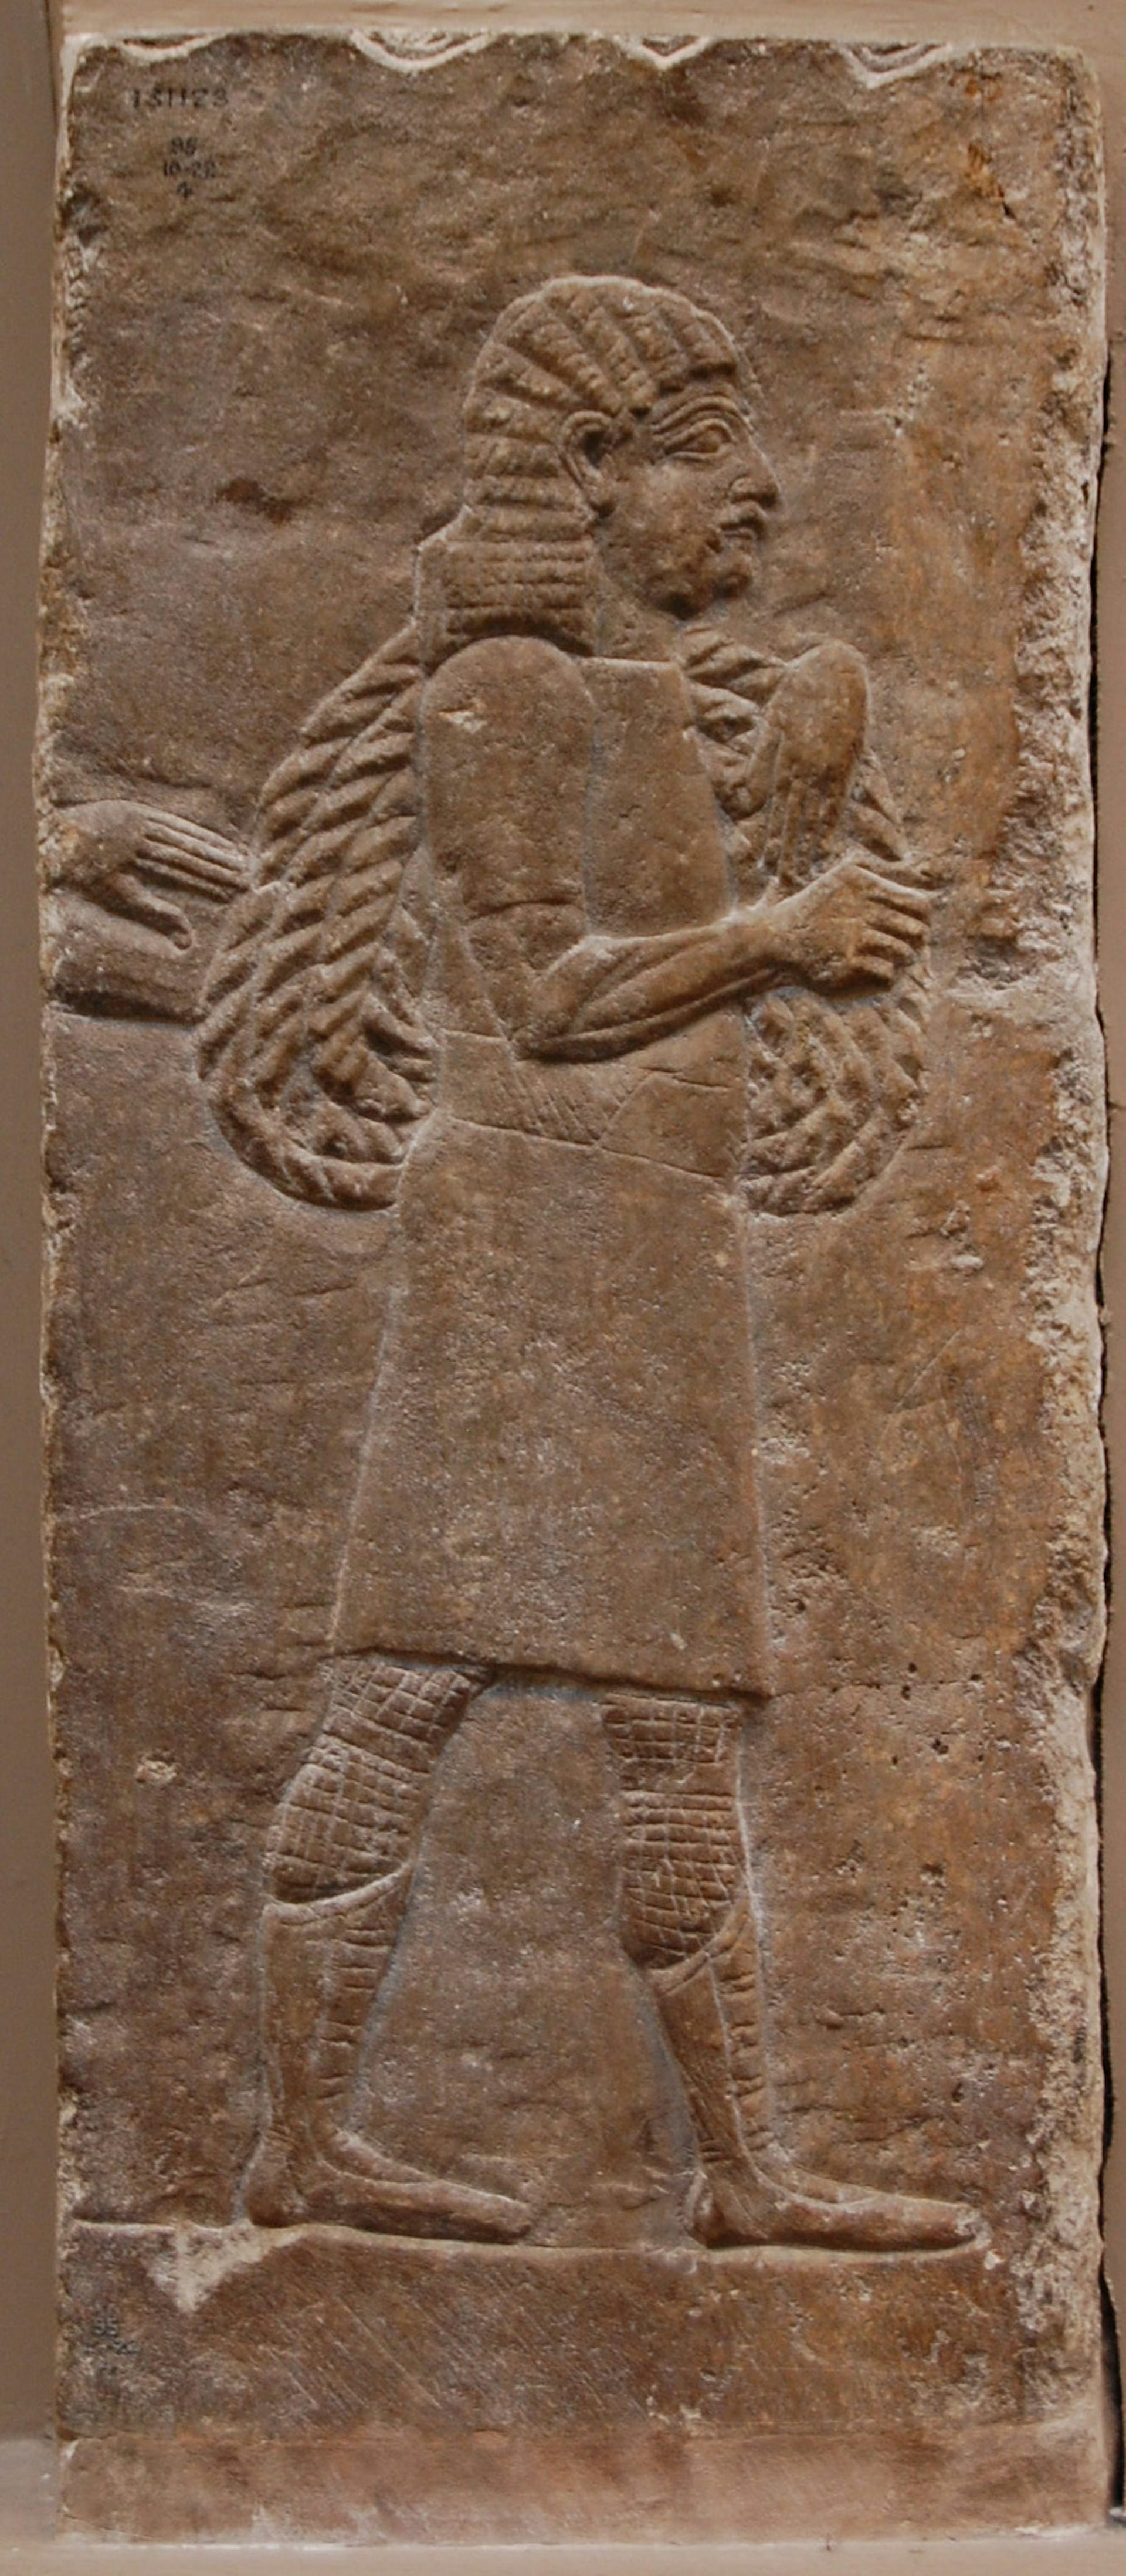 An ancient stone carving showing people carrying things.